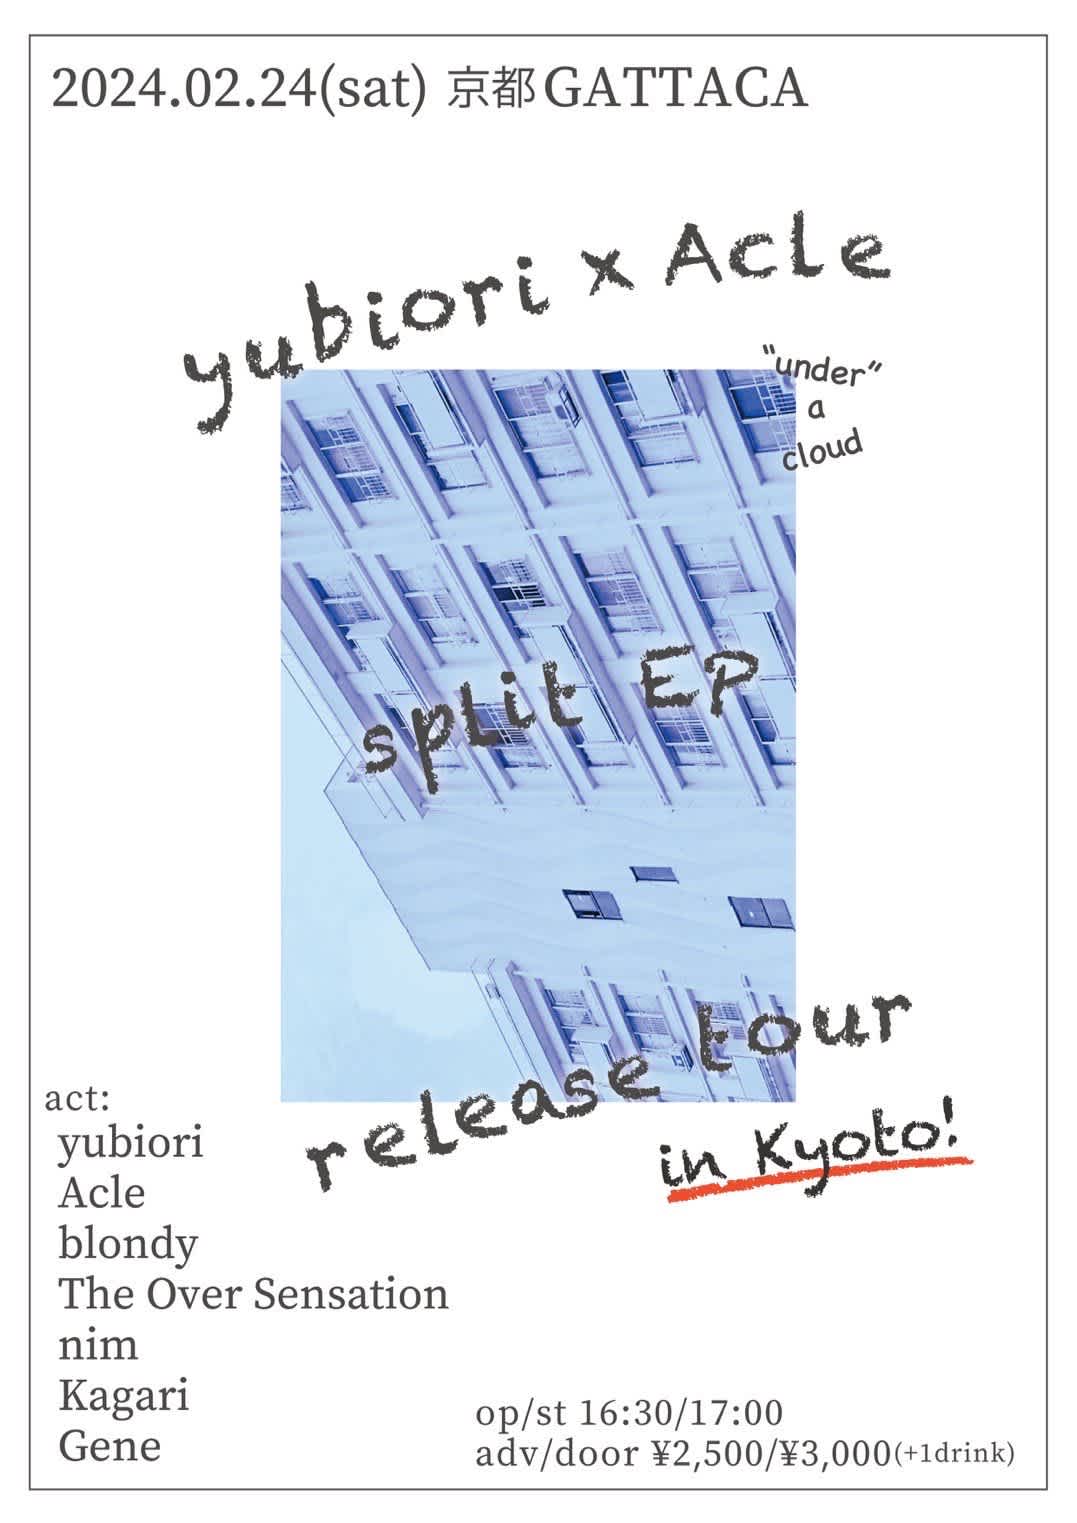 yubiori×Acle split EP "under a cloud" release tour in Kyotoのイメージ1